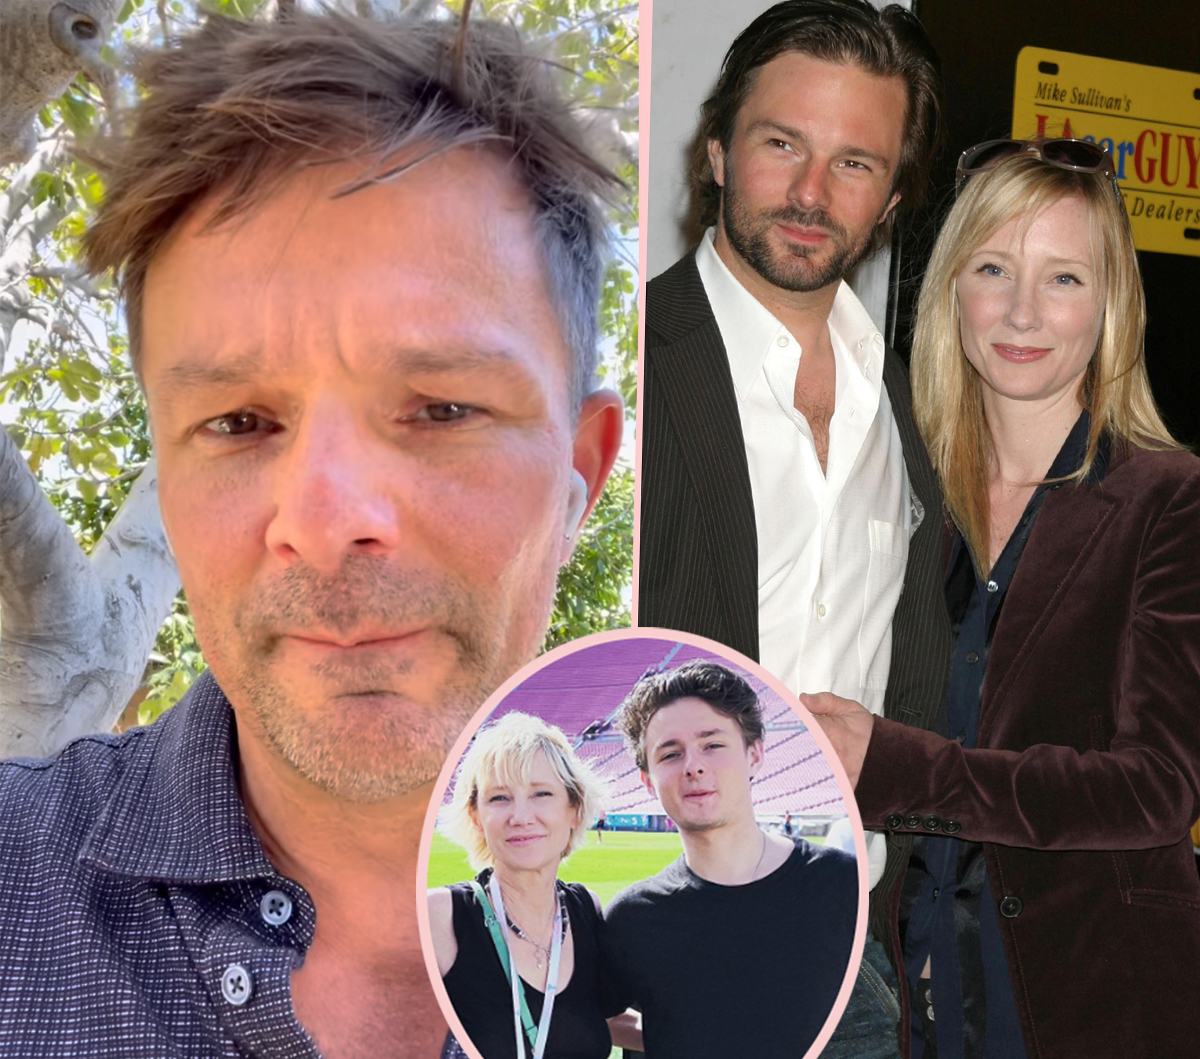 #Anne Heche’s Ex-Husband Coleman Laffoon Shares Emotional Tribute After Her Death